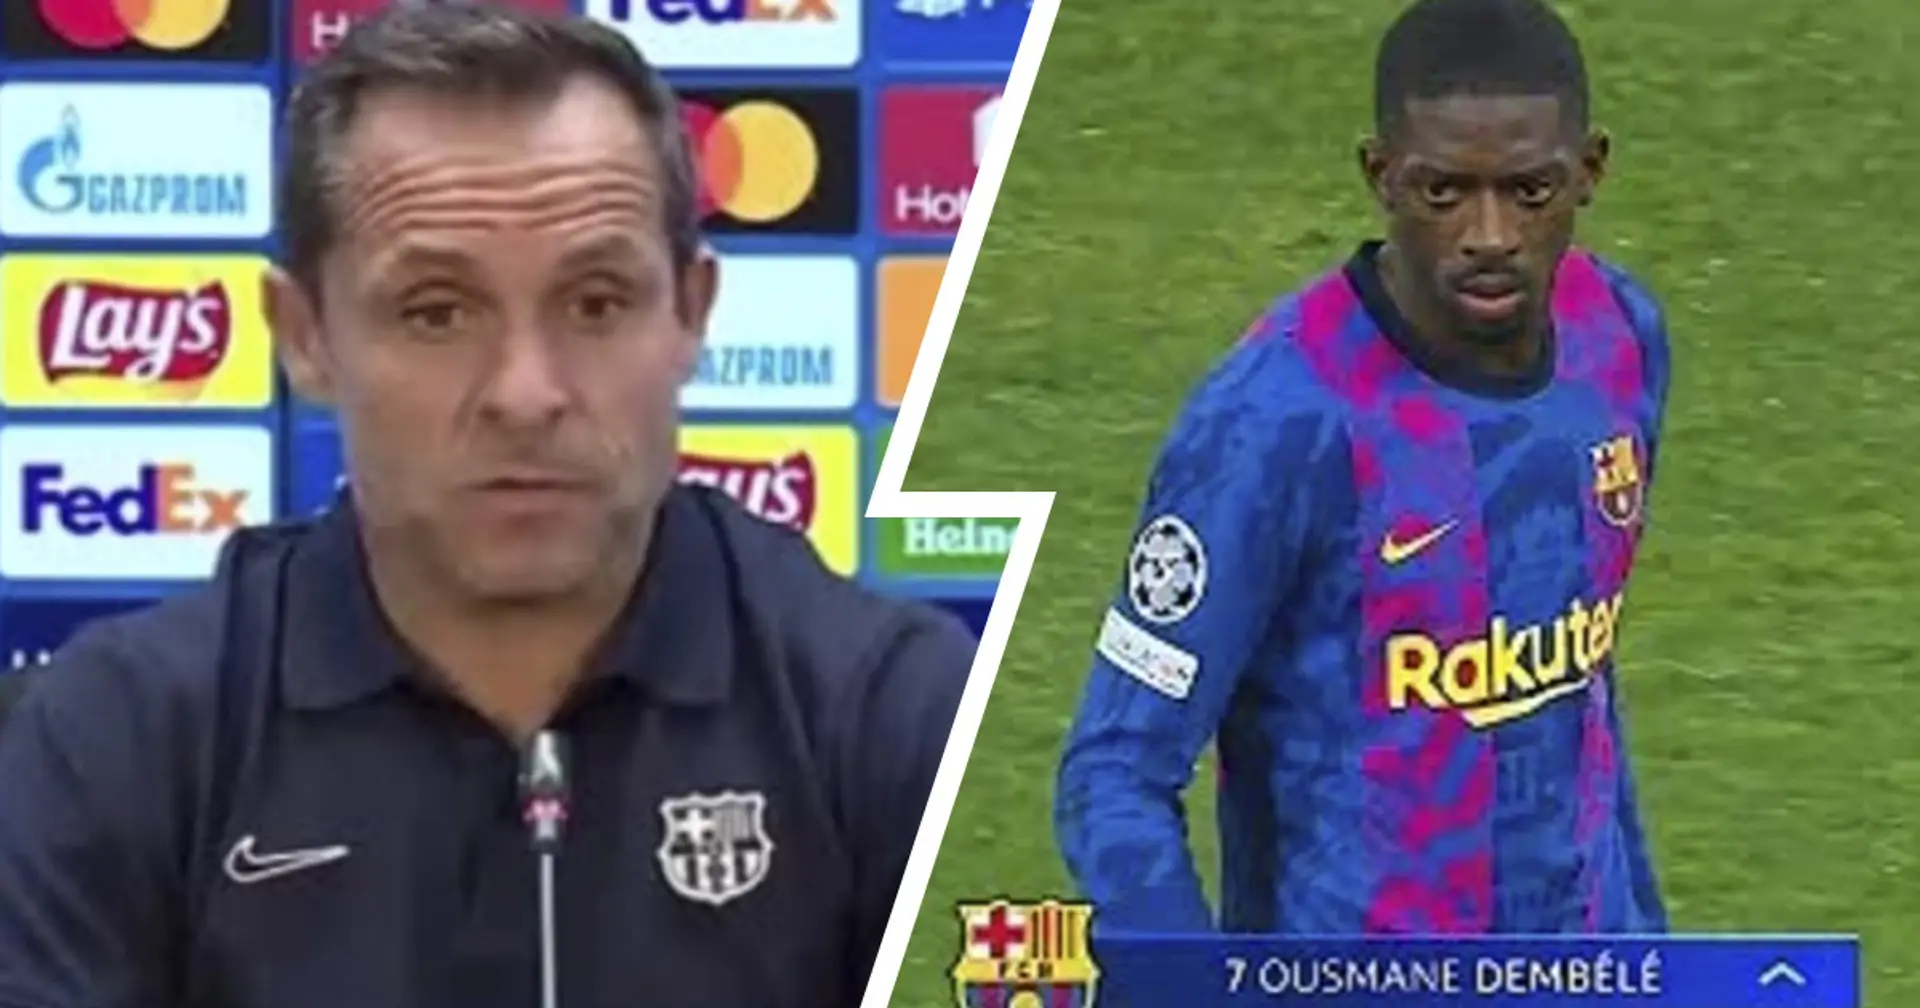 Dembele's injury relapse might be Barjuan's fault: explained